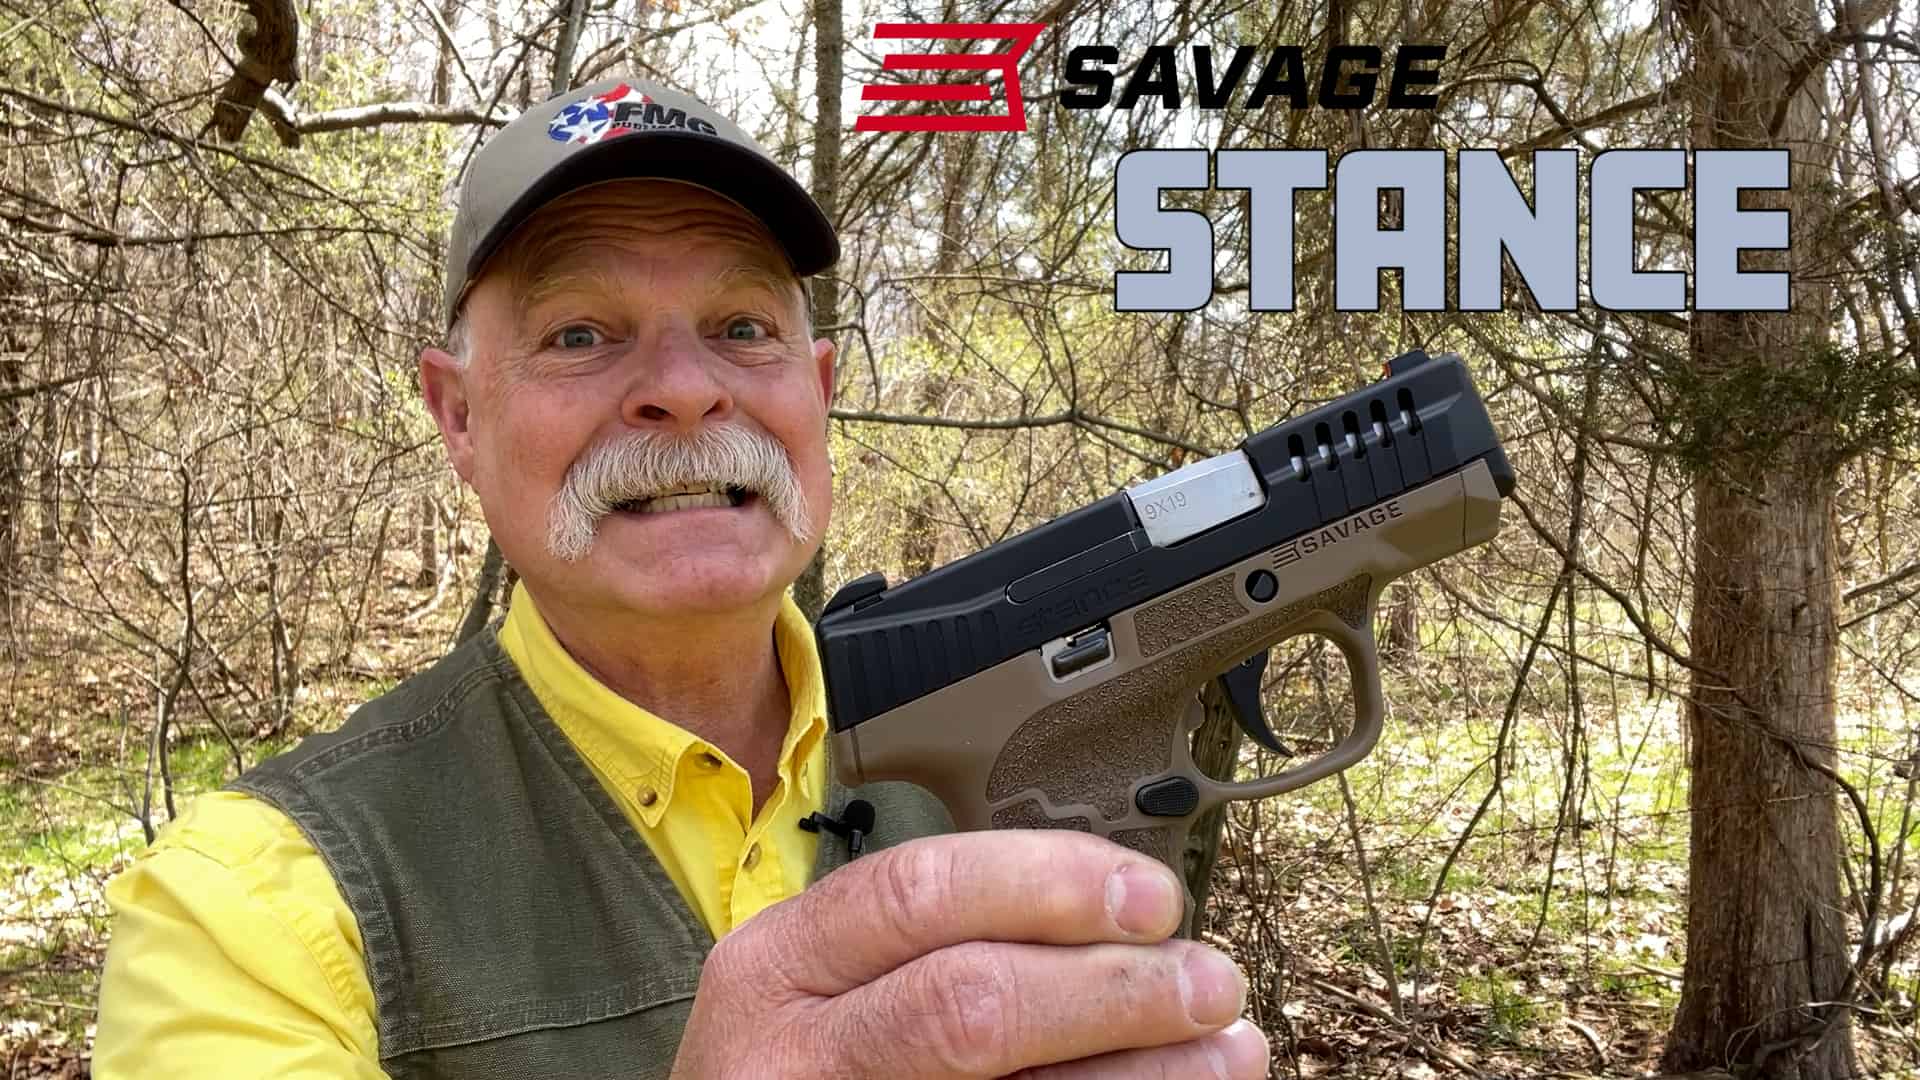 savage stance pistol; first look with Roy Huntington